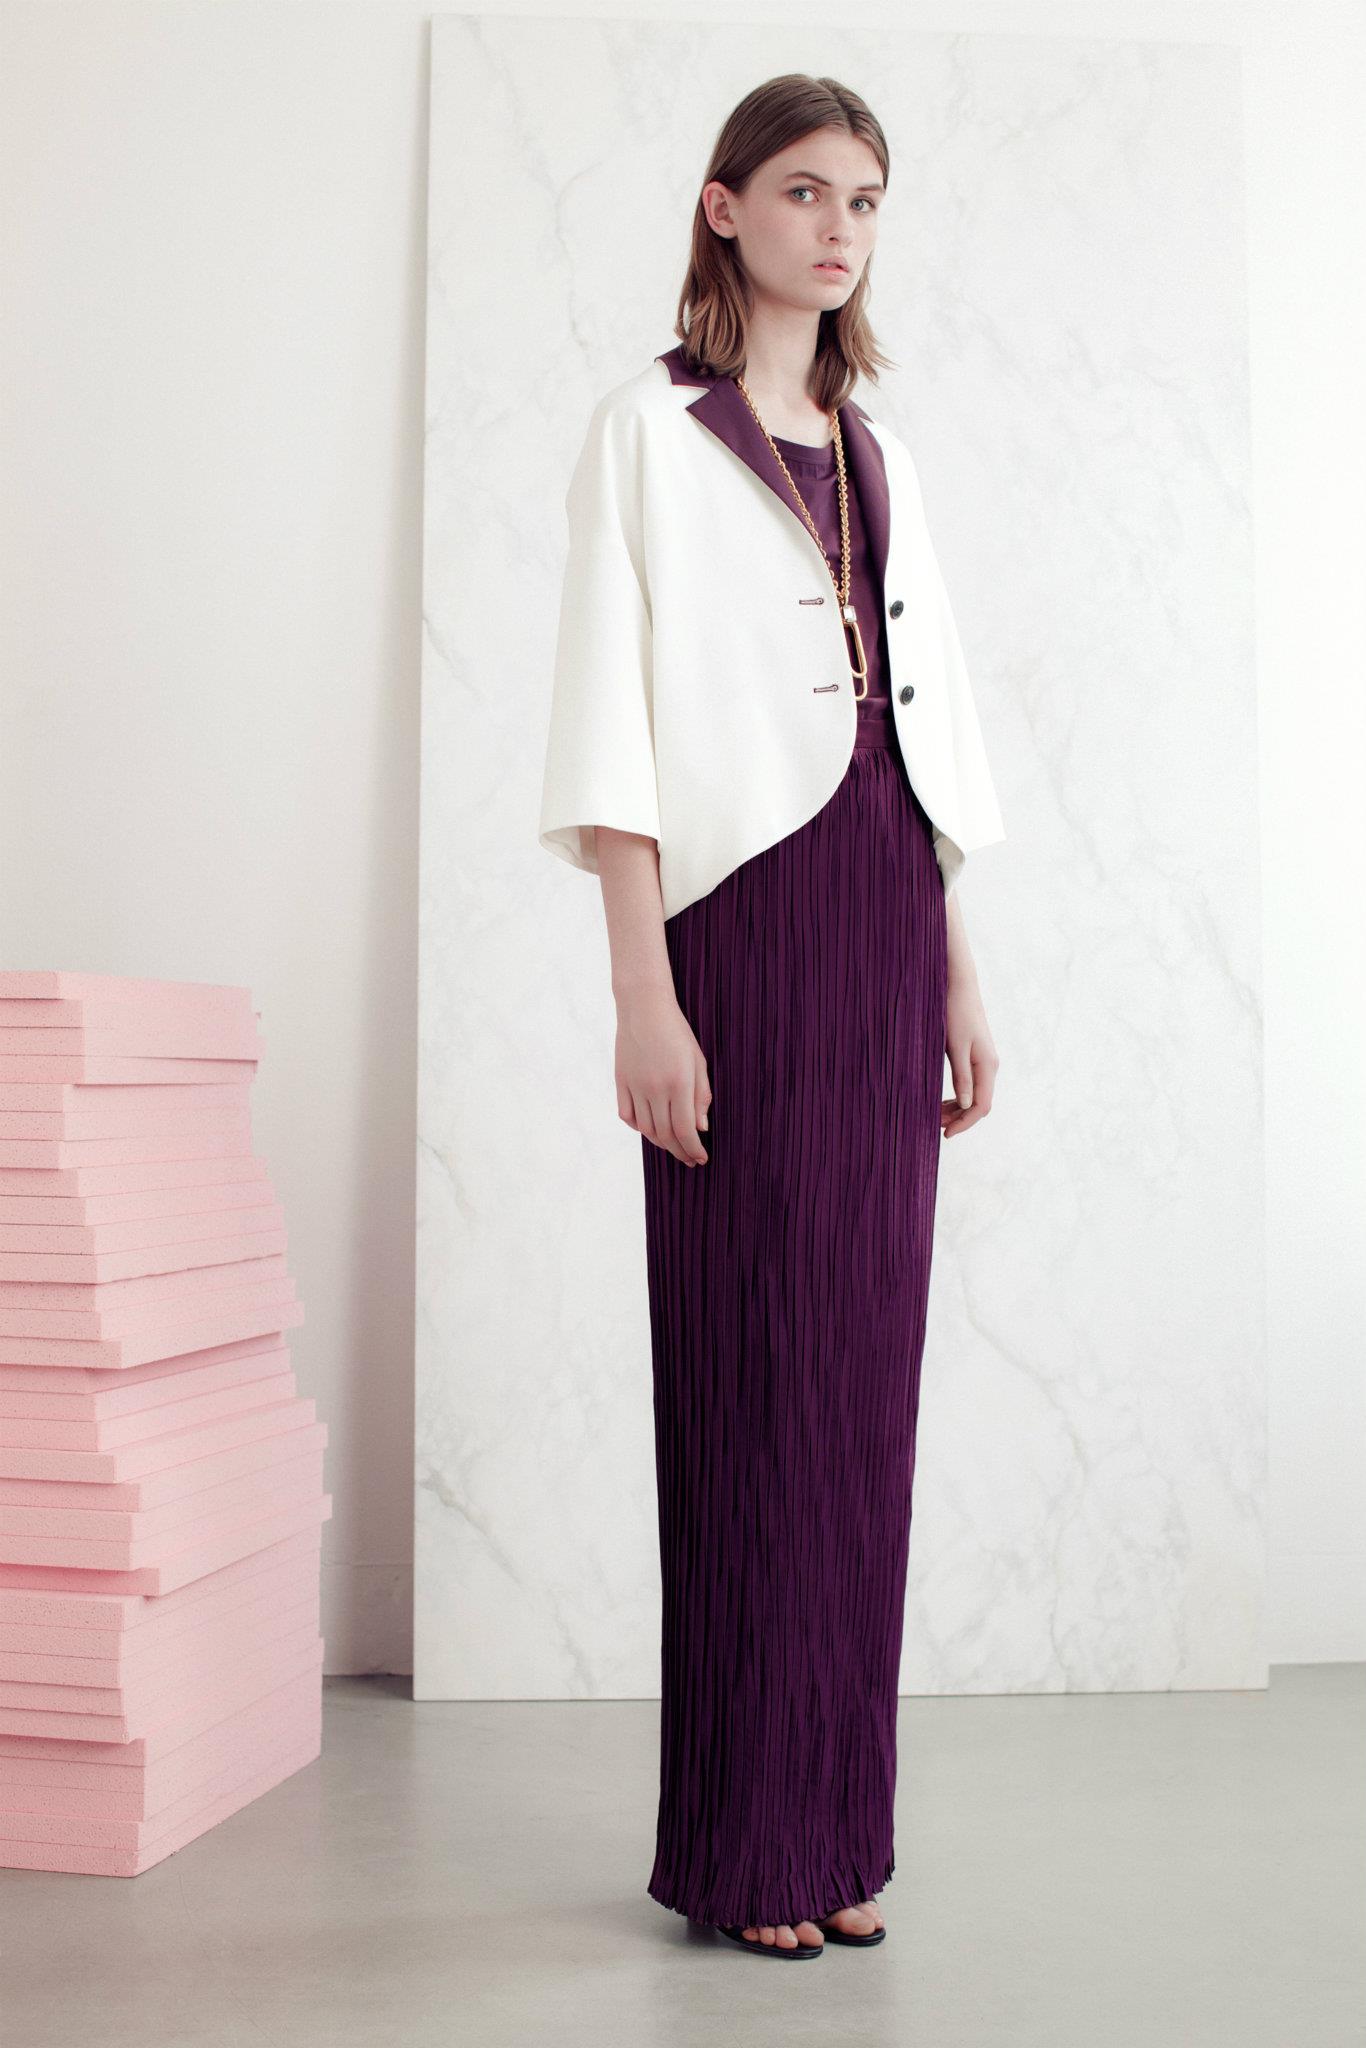 Vionnet Spring 2013 Collection 3